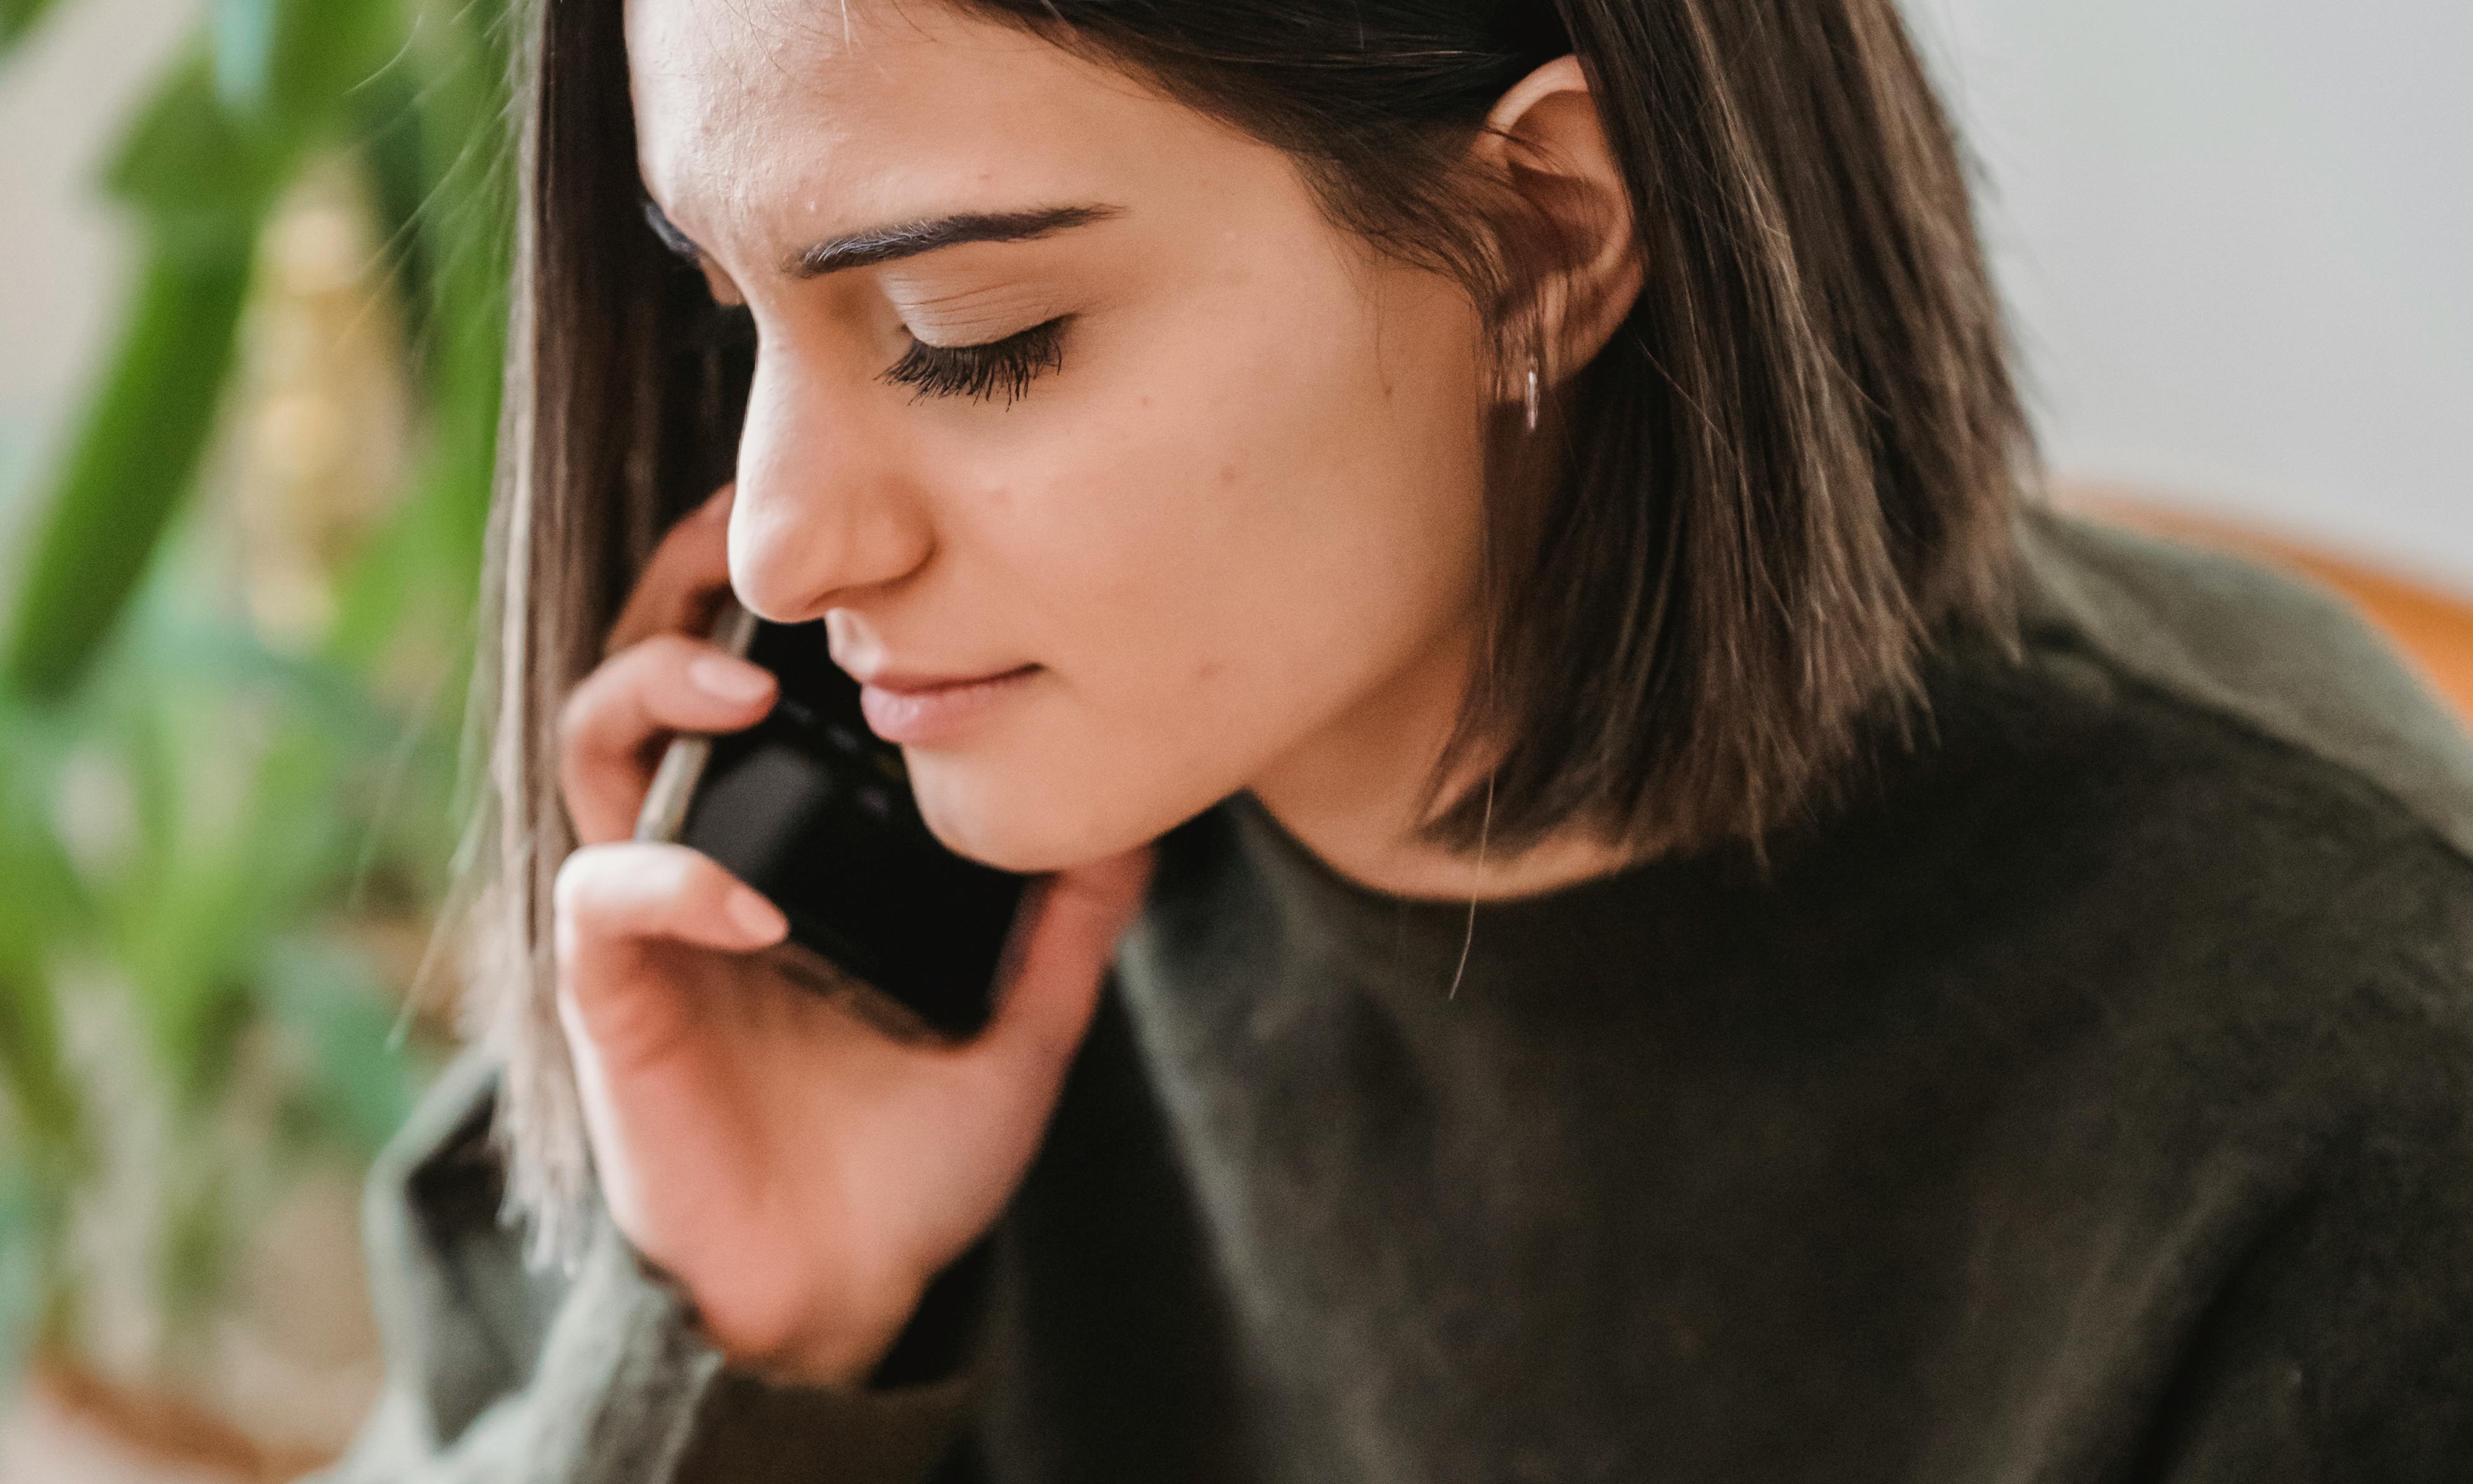 A woman makes a call on a cell phone | Source: Pexels